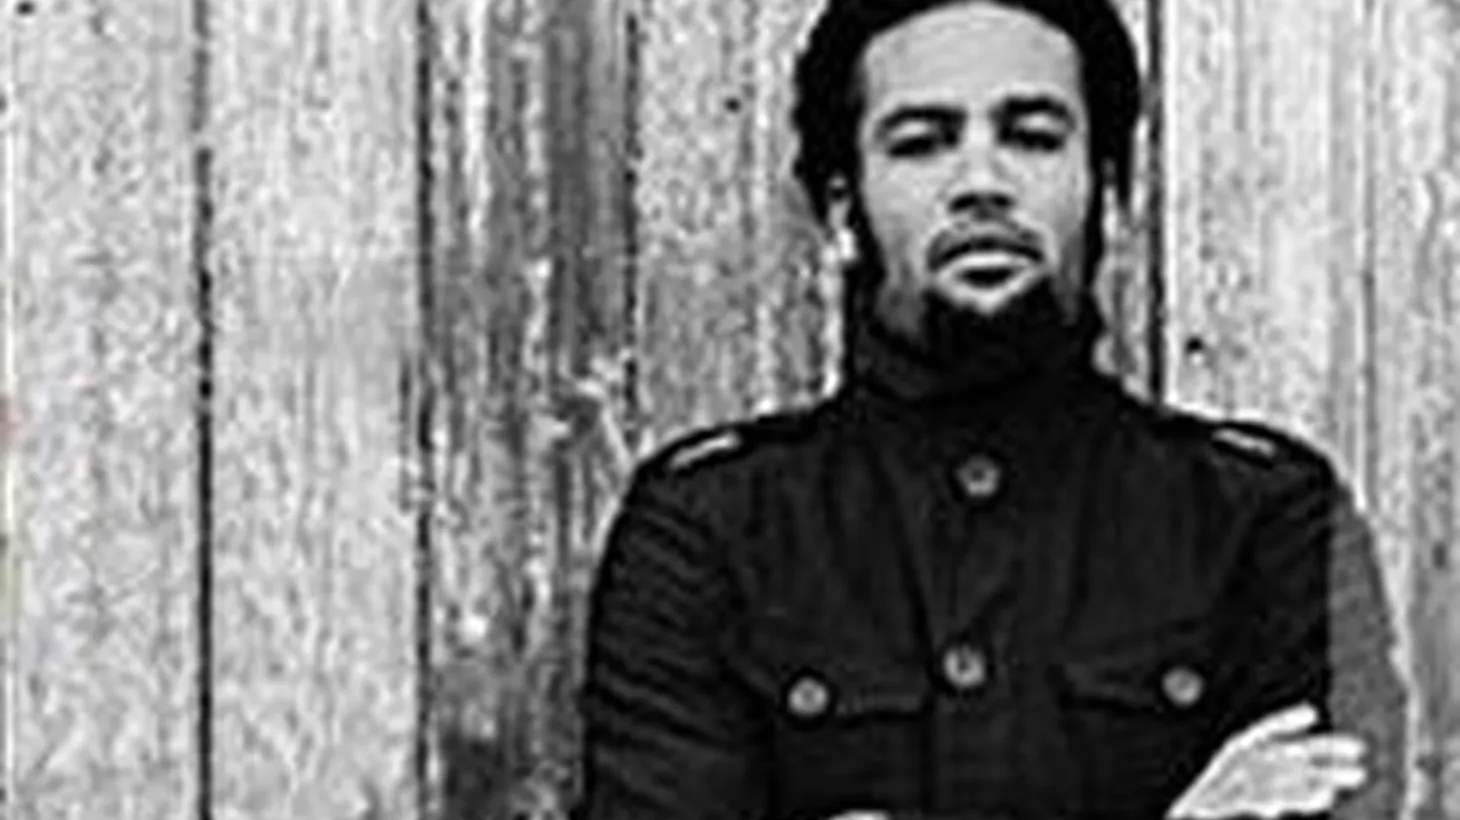 Ben Harper and his band perform an uplifting set of great music on Morning Becomes Eclectic.